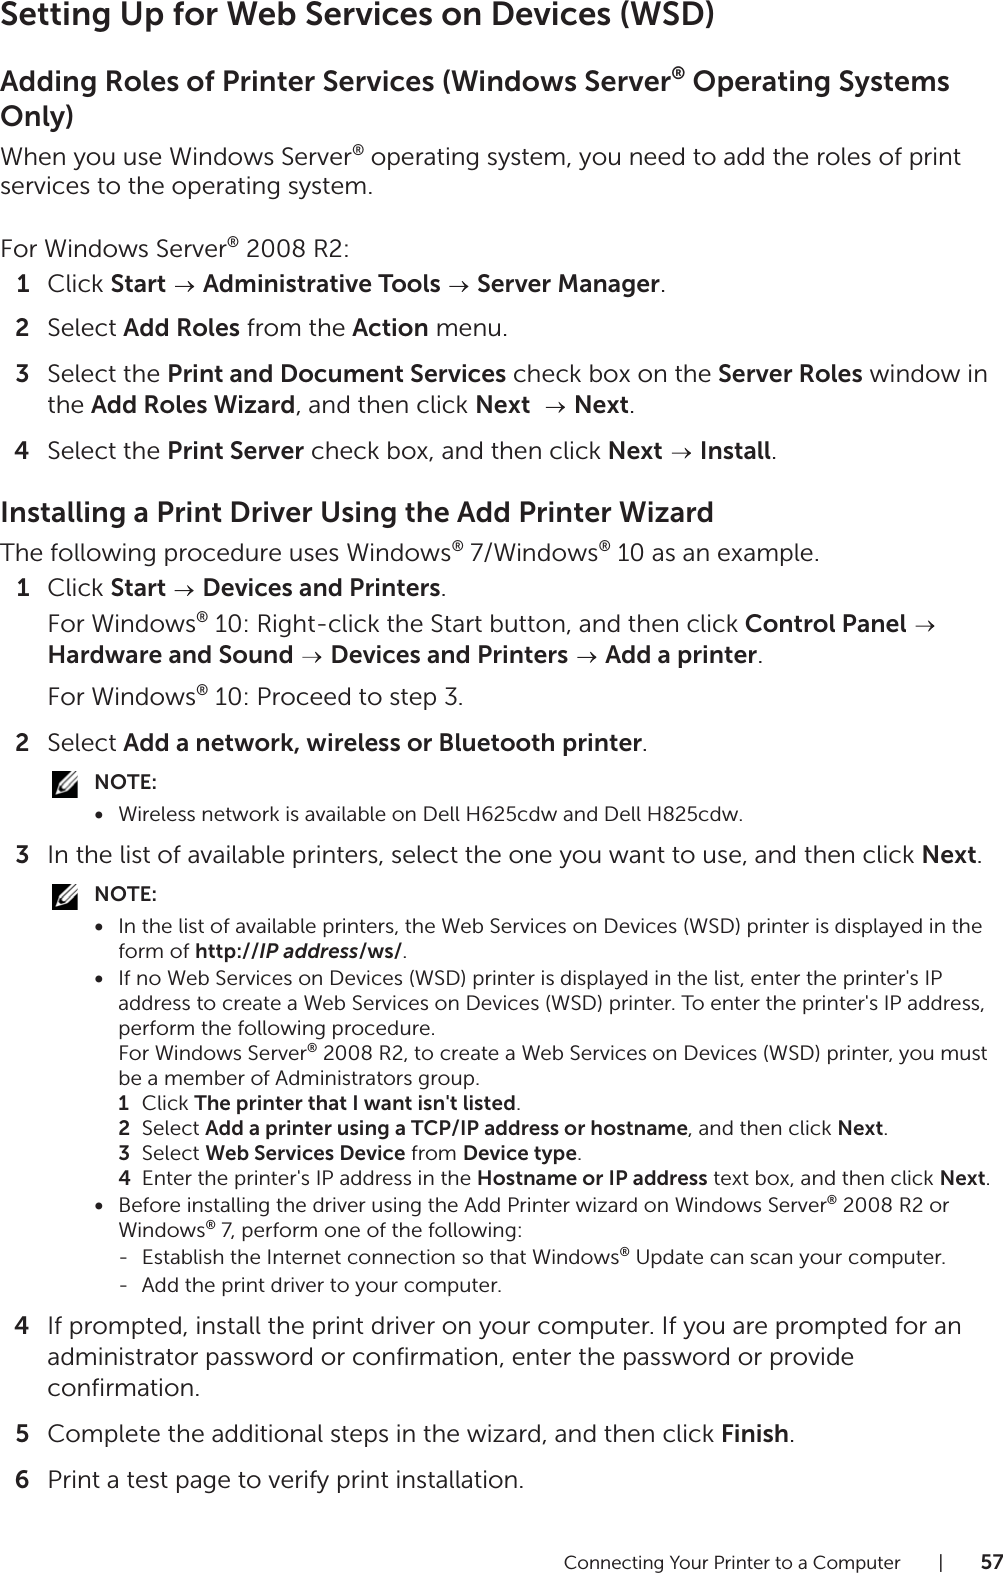 Connecting Your Printer to a Computer |57Setting Up for Web Services on Devices (WSD)Adding Roles of Printer Services (Windows Server® Operating Systems Only)When you use Windows Server® operating system, you need to add the roles of print services to the operating system.For Windows Server® 2008 R2:1Click Start  Administrative Tools   Server Manager.2Select Add Roles from the Action menu.3Select the Print and Document Services check box on the Server Roles window in the Add Roles Wizard, and then click Next    Next.4Select the Print Server check box, and then click Next  Install.Installing a Print Driver Using the Add Printer WizardThe following procedure uses Windows® 7/Windows® 10 as an example.1Click Start   Devices and Printers.For Windows® 10: Right-click the Start button, and then click Control Panel  Hardware and Sound  Devices and Printers  Add a printer.For Windows® 10: Proceed to step 3.2Select Add a network, wireless or Bluetooth printer.NOTE:•Wireless network is available on Dell H625cdw and Dell H825cdw.3In the list of available printers, select the one you want to use, and then click Next.NOTE:•In the list of available printers, the Web Services on Devices (WSD) printer is displayed in the form of http://IP address/ws/.•If no Web Services on Devices (WSD) printer is displayed in the list, enter the printer&apos;s IP address to create a Web Services on Devices (WSD) printer. To enter the printer&apos;s IP address, perform the following procedure.For Windows Server® 2008 R2, to create a Web Services on Devices (WSD) printer, you must be a member of Administrators group.1Click The printer that I want isn&apos;t listed.2Select Add a printer using a TCP/IP address or hostname, and then click Next.3Select Web Services Device from Device type.4Enter the printer&apos;s IP address in the Hostname or IP address text box, and then click Next.•Before installing the driver using the Add Printer wizard on Windows Server® 2008 R2 or Windows® 7, perform one of the following:- Establish the Internet connection so that Windows® Update can scan your computer.- Add the print driver to your computer.4If prompted, install the print driver on your computer. If you are prompted for an administrator password or confirmation, enter the password or provide confirmation.5Complete the additional steps in the wizard, and then click Finish.6Print a test page to verify print installation.